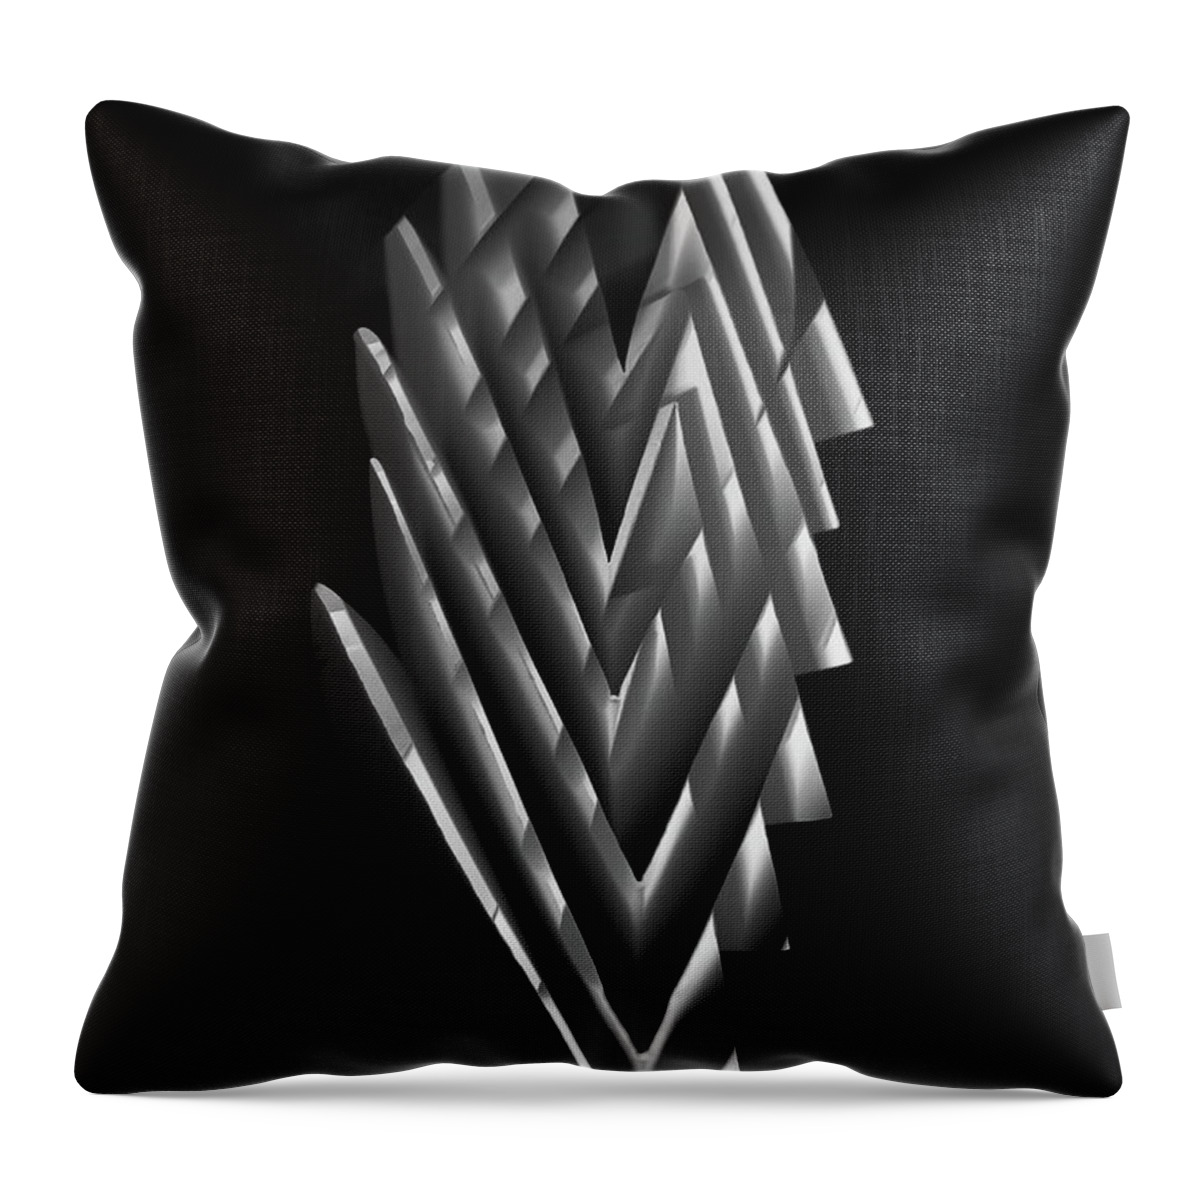 Geometric Throw Pillow featuring the photograph Geometric Shapes Monochrome by Jeff Townsend